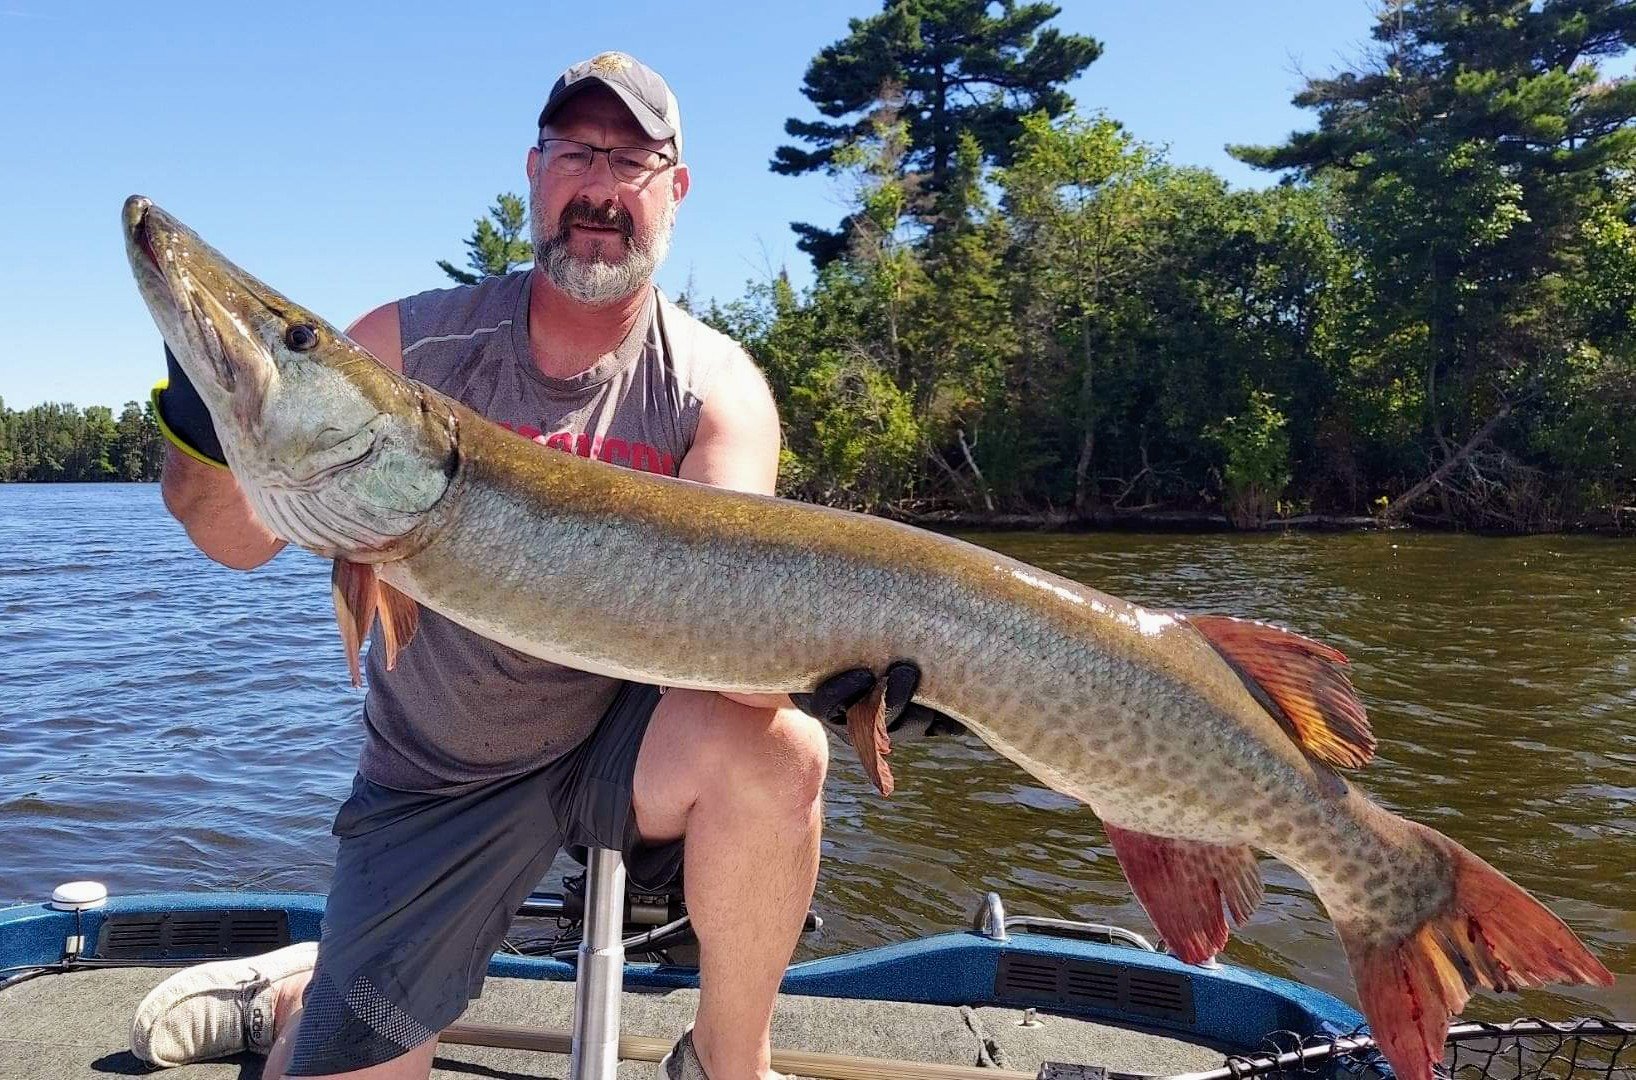 Bought my first musky rod 2 weeks ago and fell into the deep end